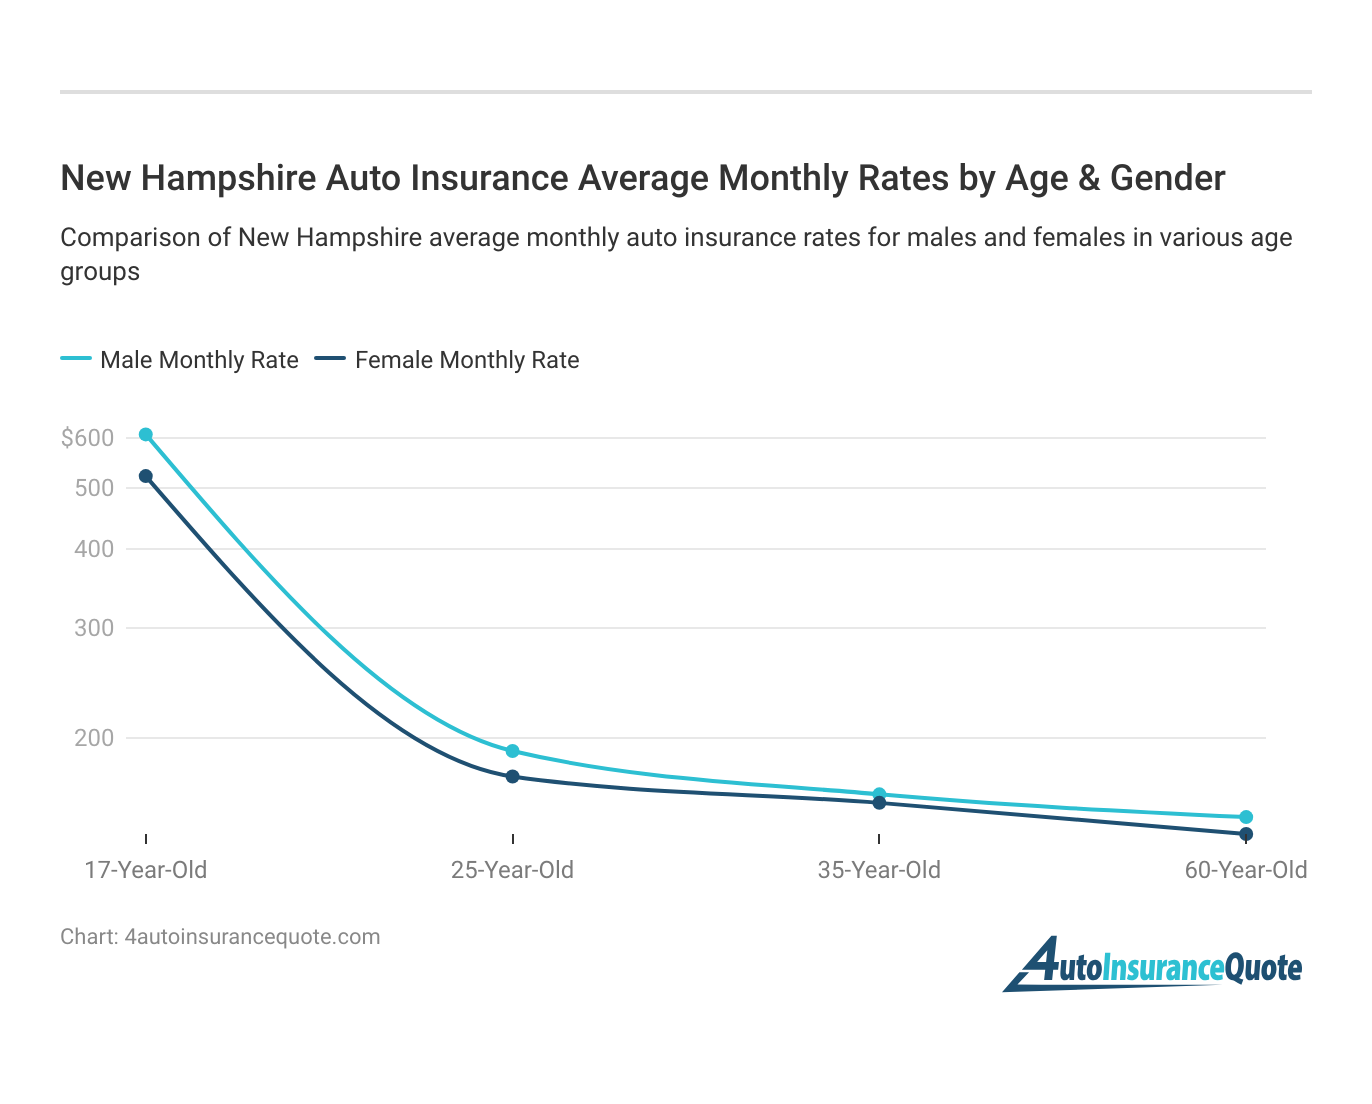 <h3>New Hampshire Auto Insurance Average Monthly Rates by Age & Gender</h3>